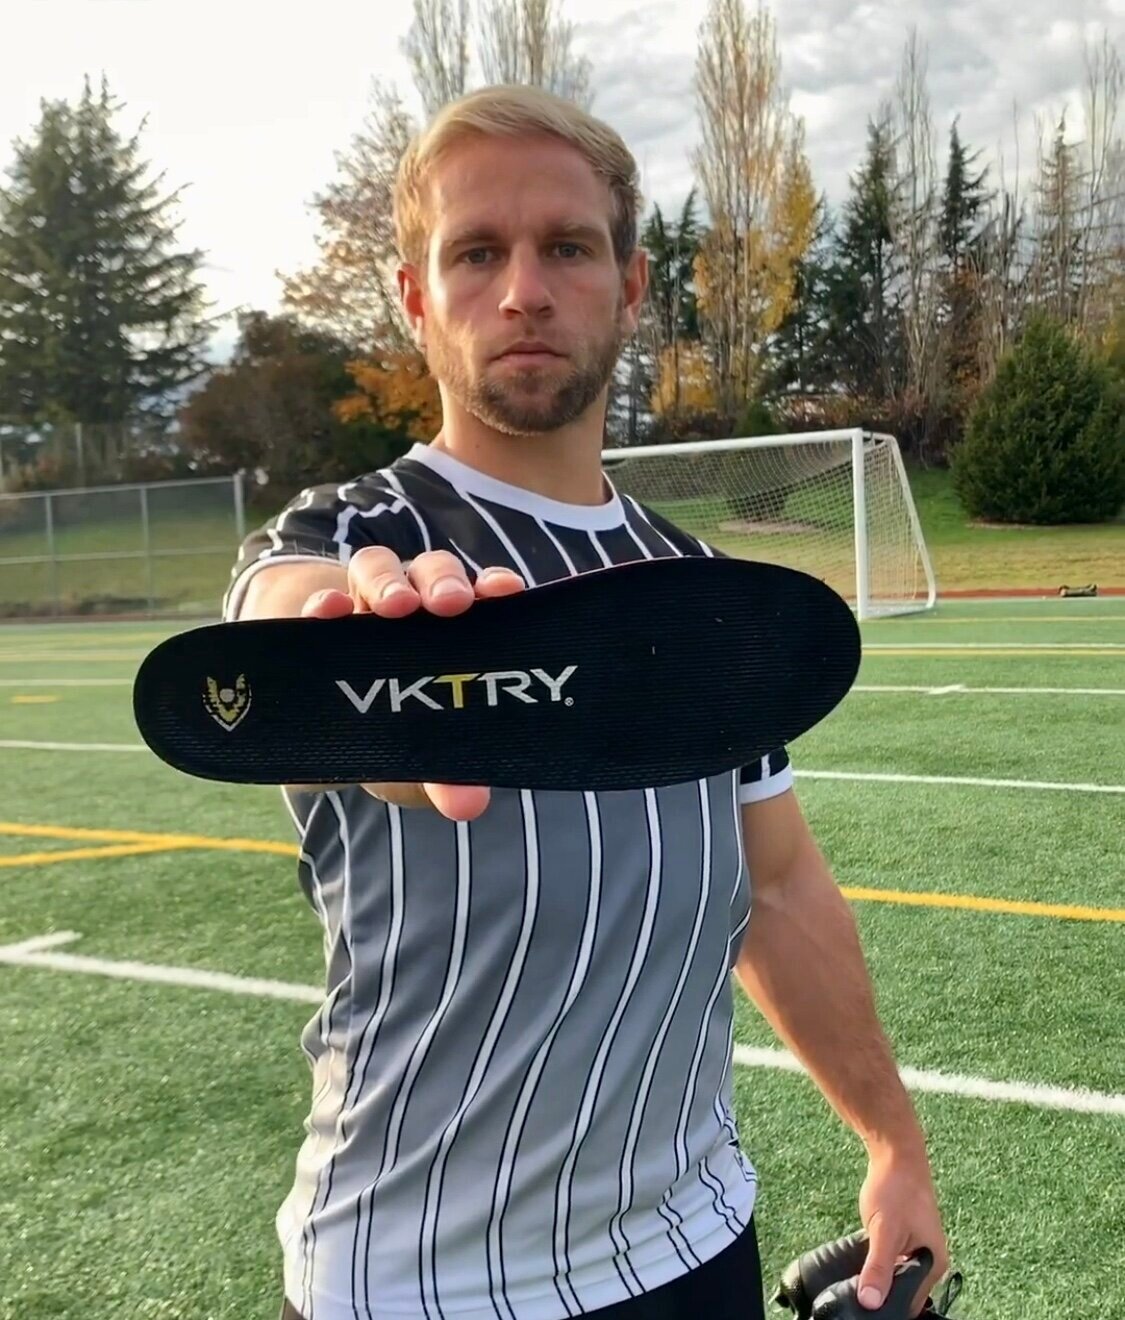 How VKTRY Insoles Help with Injury Protection and Recovery – VKTRY Gear